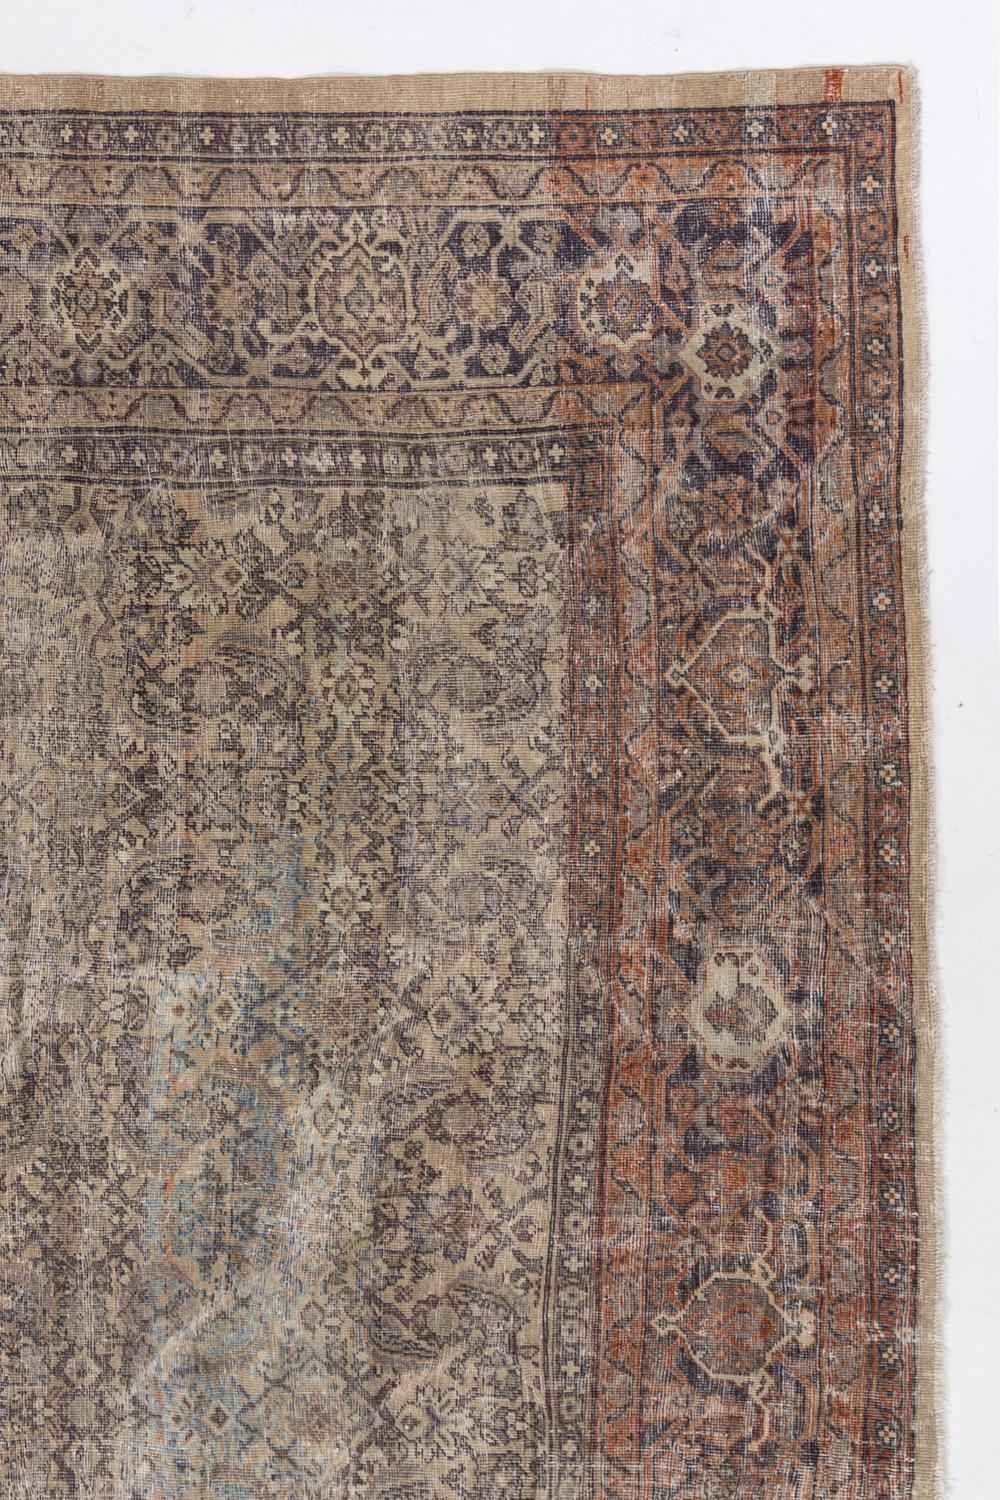 Hand-Woven Brown and Tan Antique Persian Rug For Sale